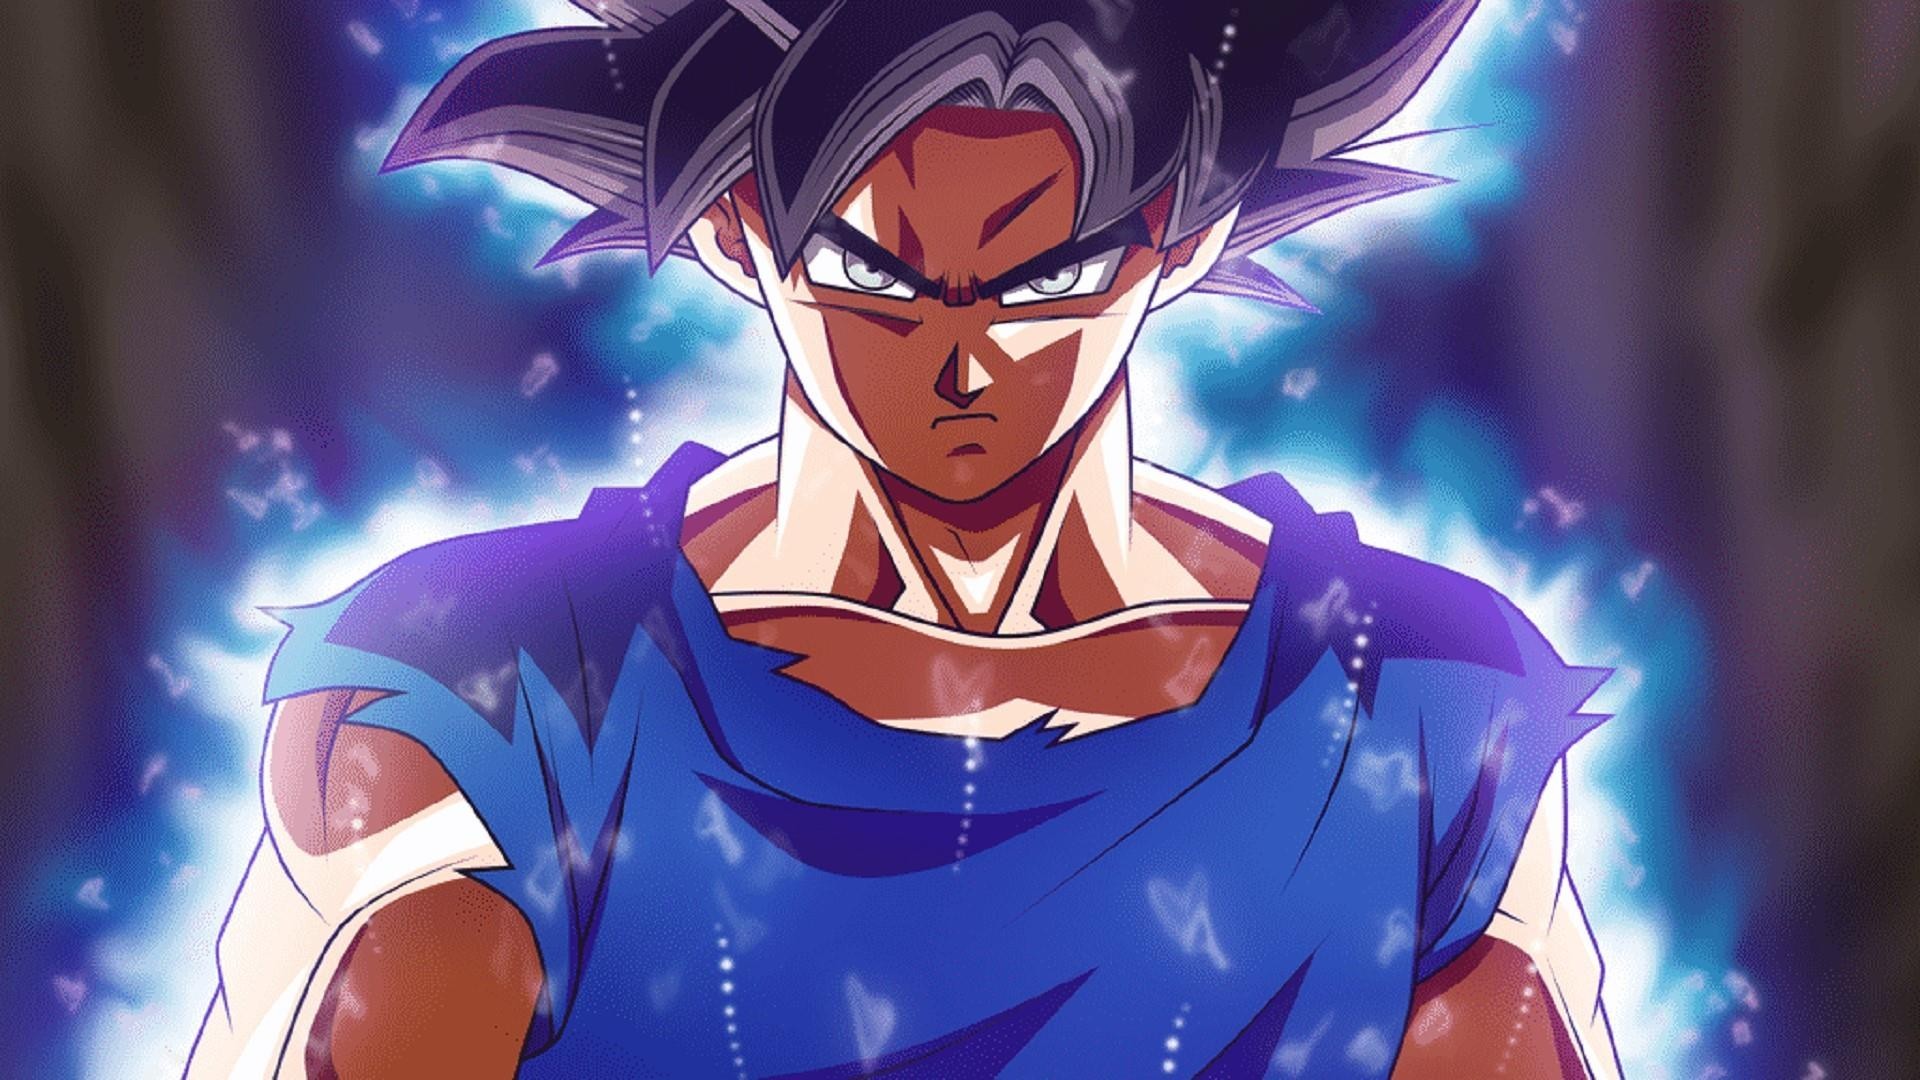 Desktop Wallpaper Goku Imagenes with image resolution 1920x1080 pixel. You can use this wallpaper as background for your desktop Computer Screensavers, Android or iPhone smartphones